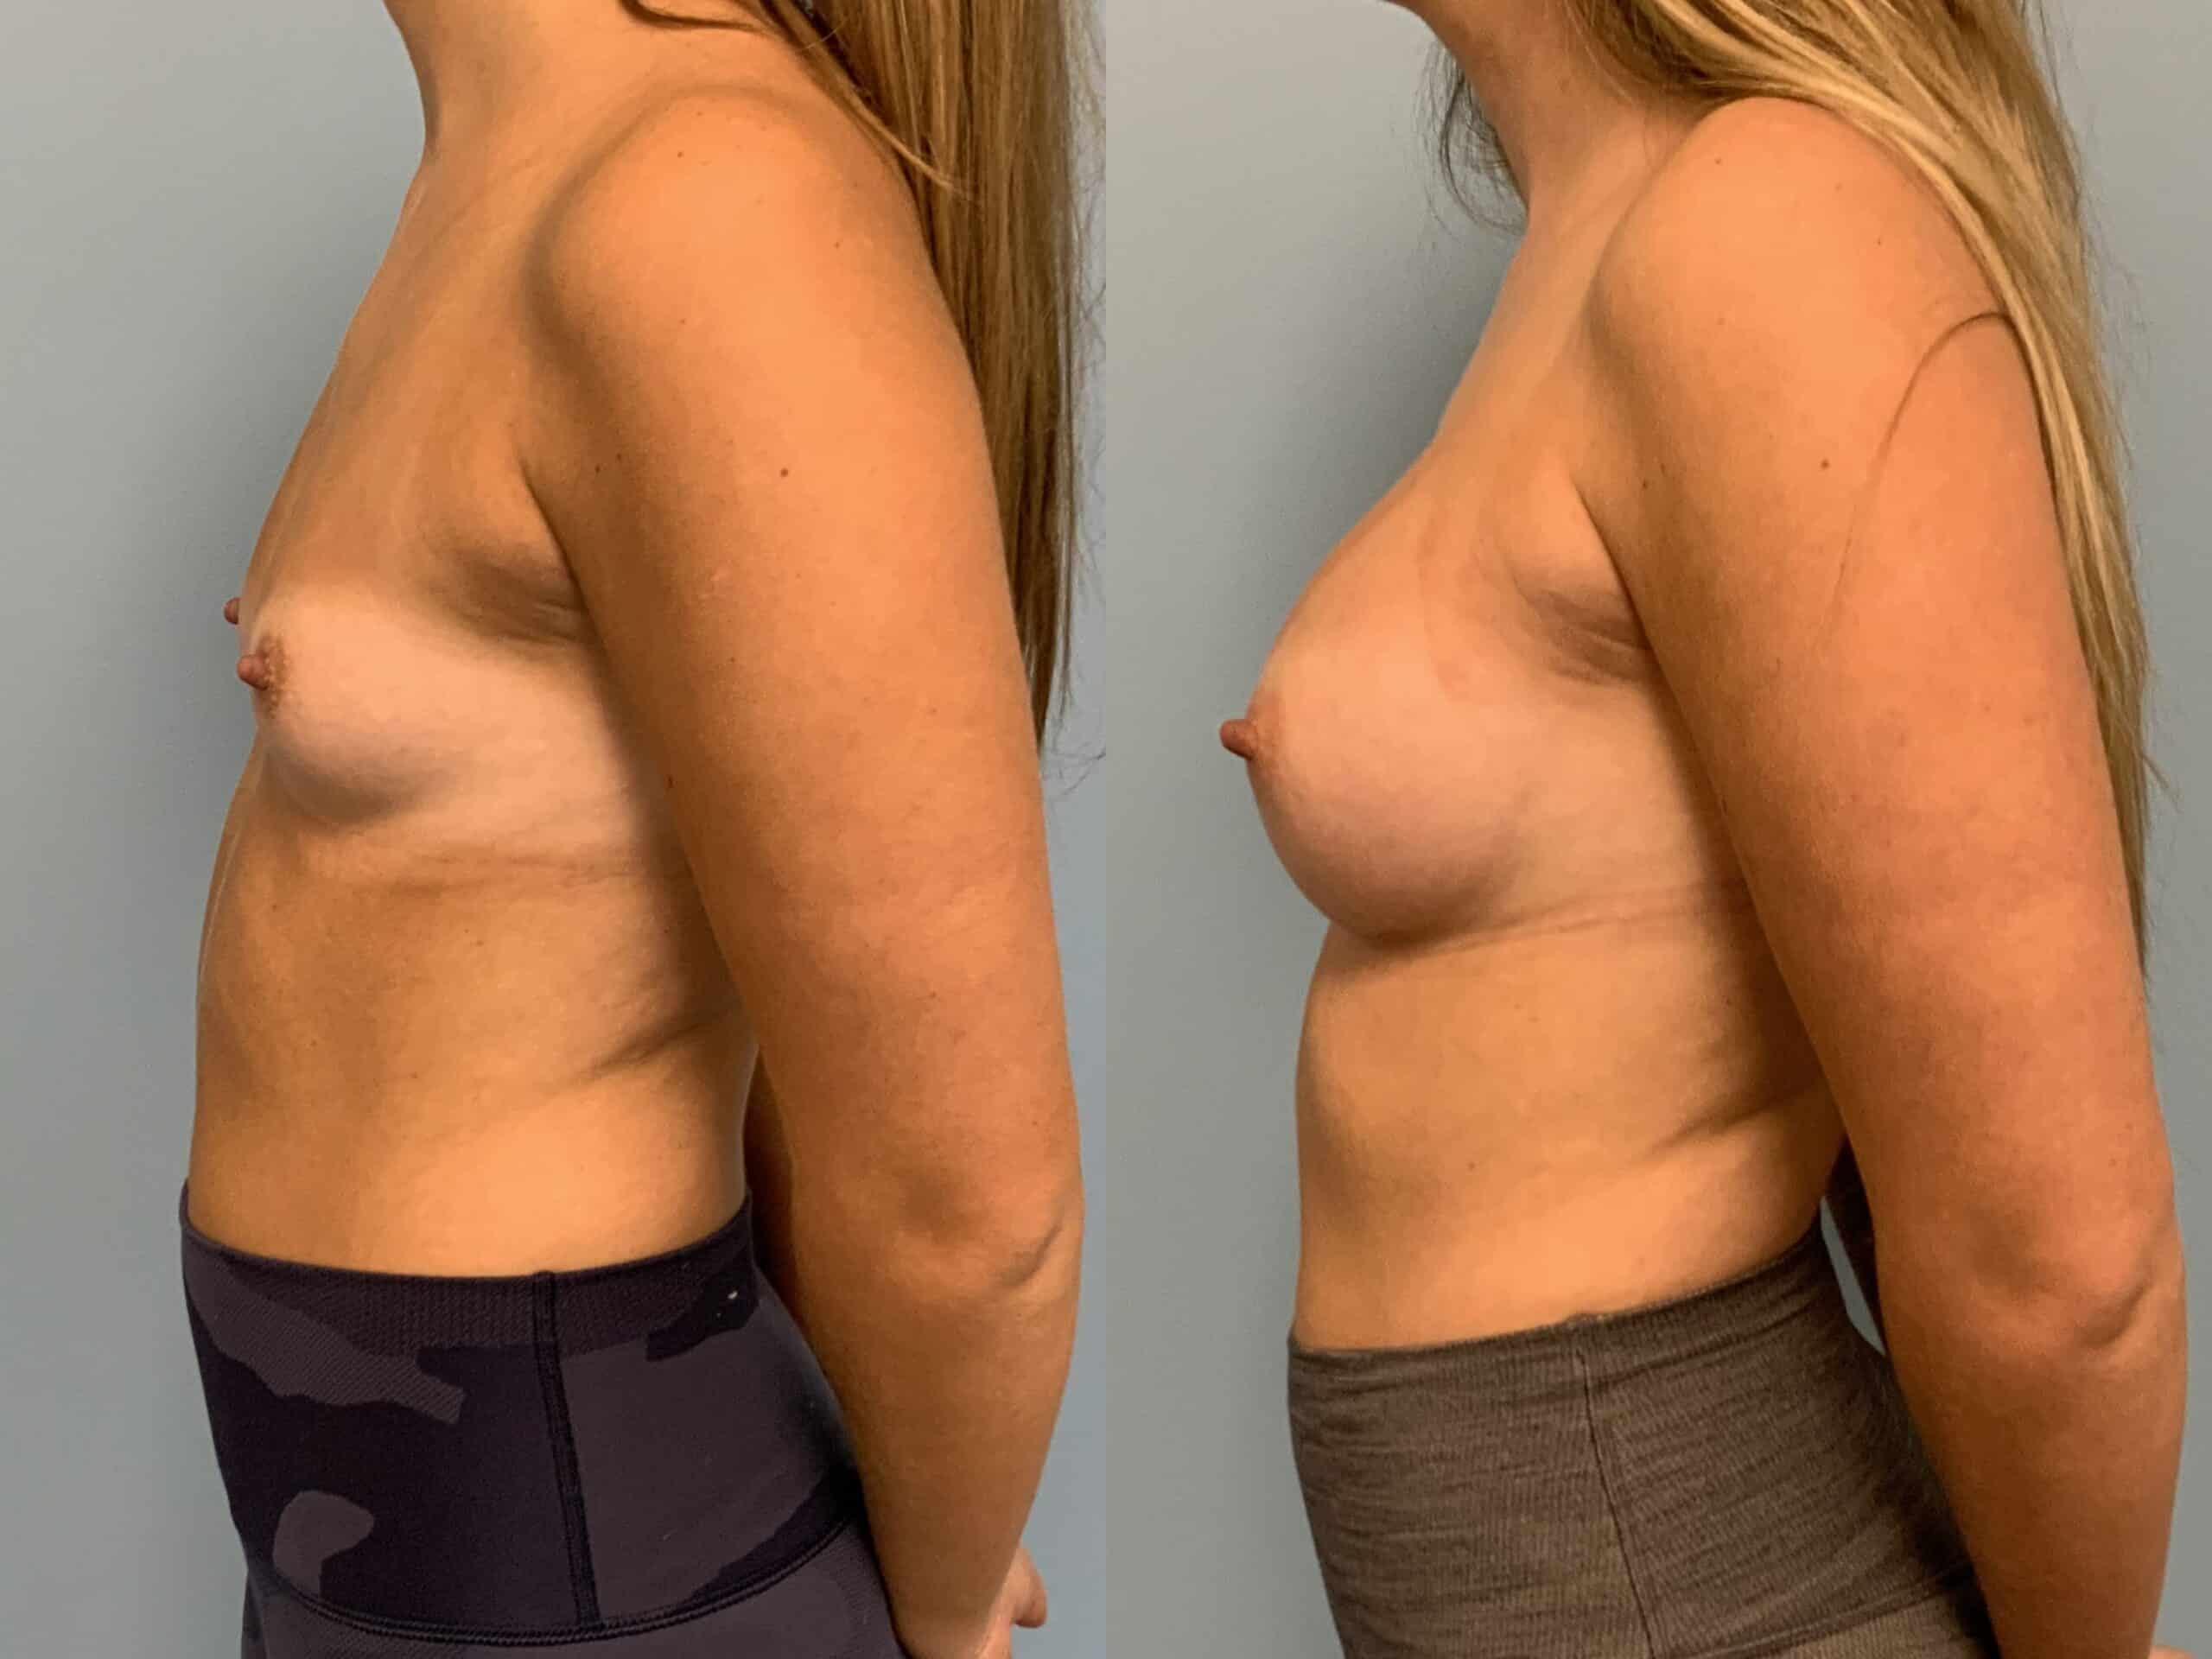 Before and after, Patient 7 mo post op from Breast Augmentation, Level III Muscle Release procedures performed by Dr. Paul Vanek